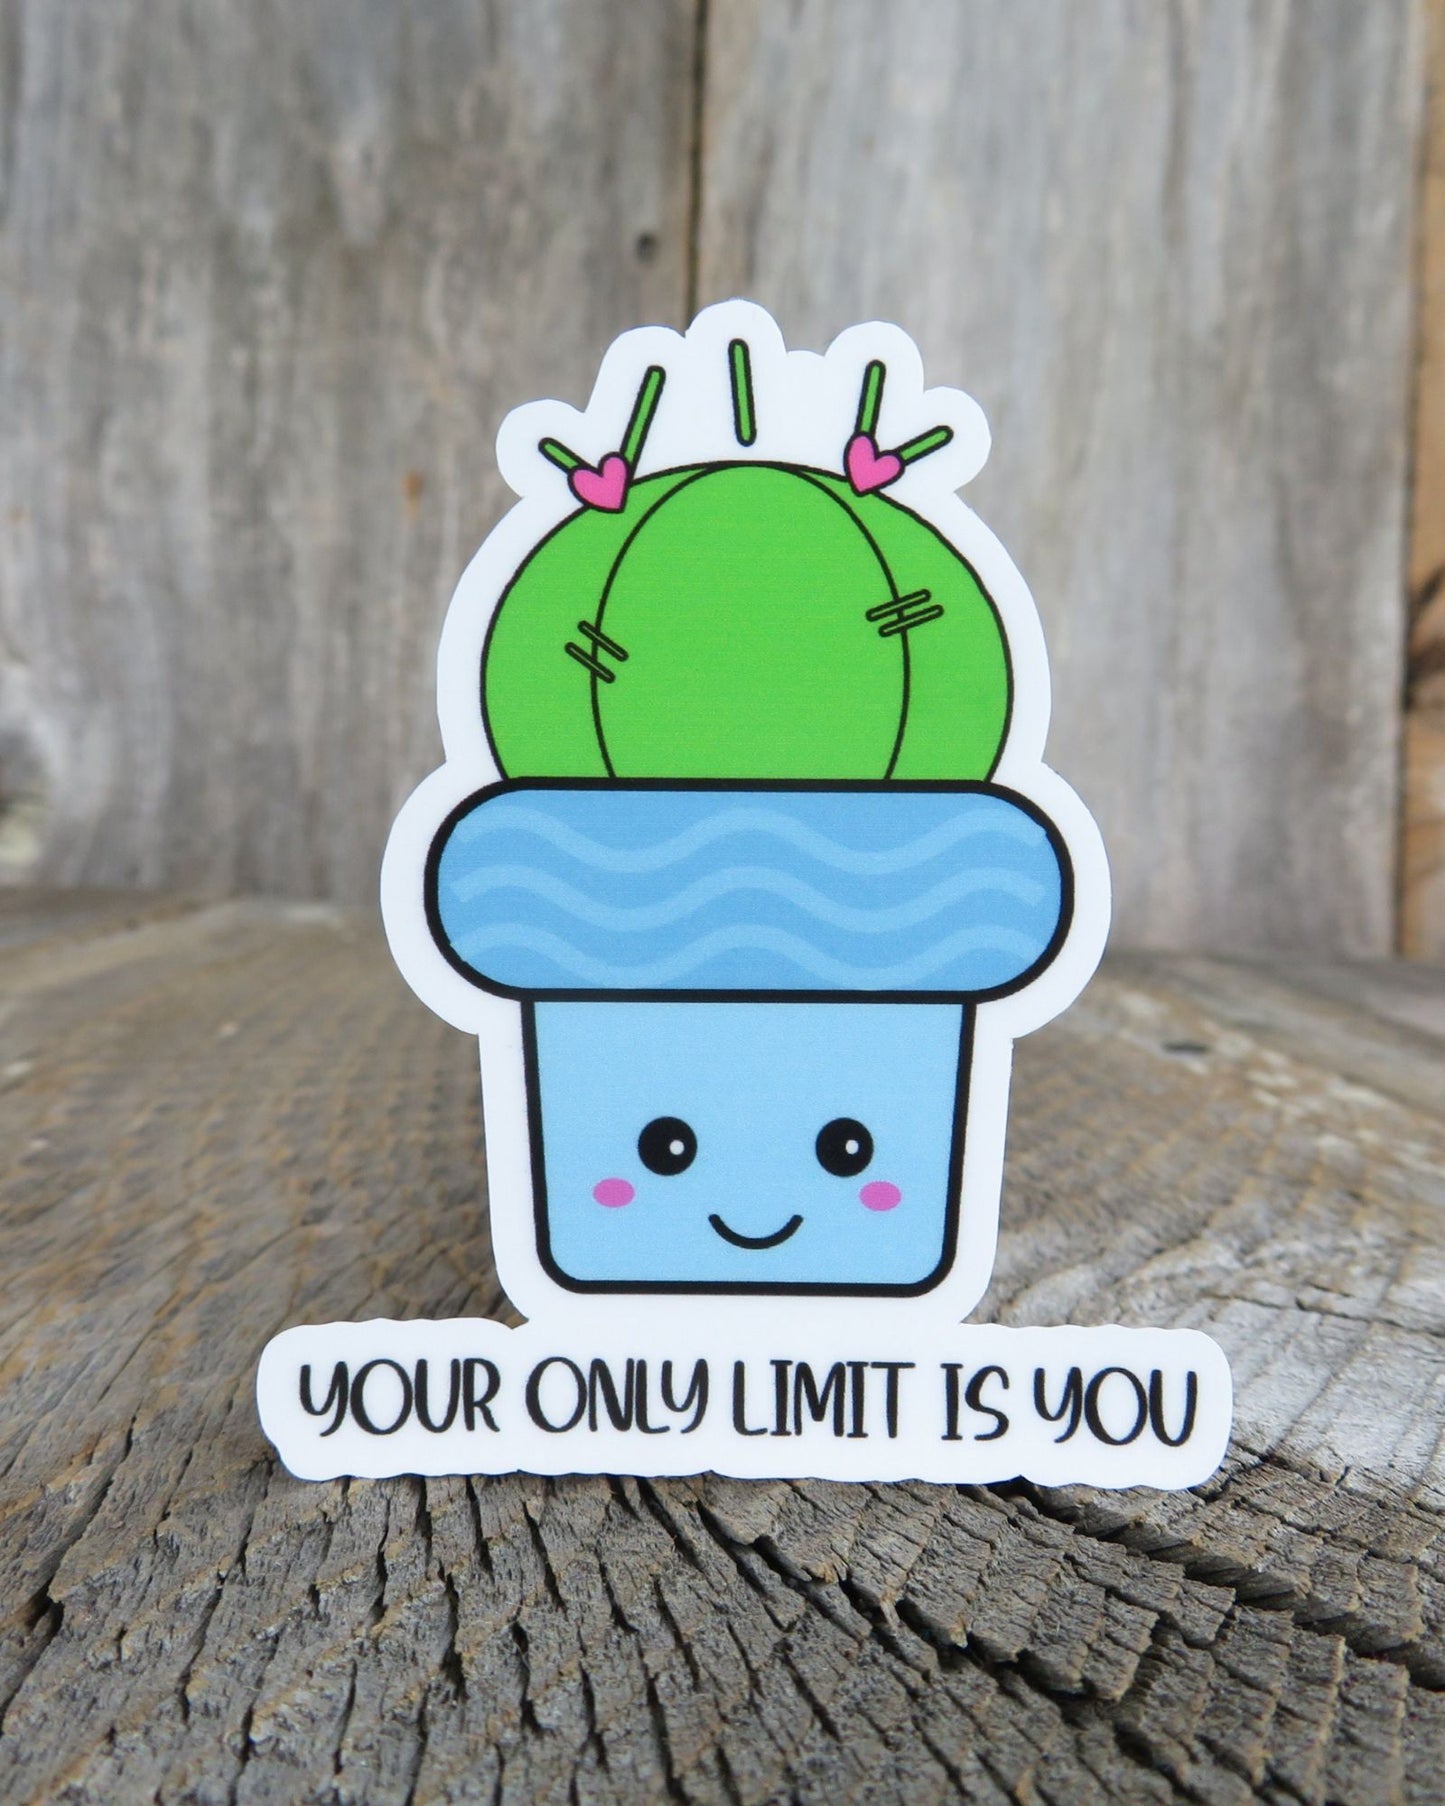 Your Only Limit Is You Sticker Full Color Kawaii Cactus Plant Waterproof Positive Saying House Plant lovers Succulent